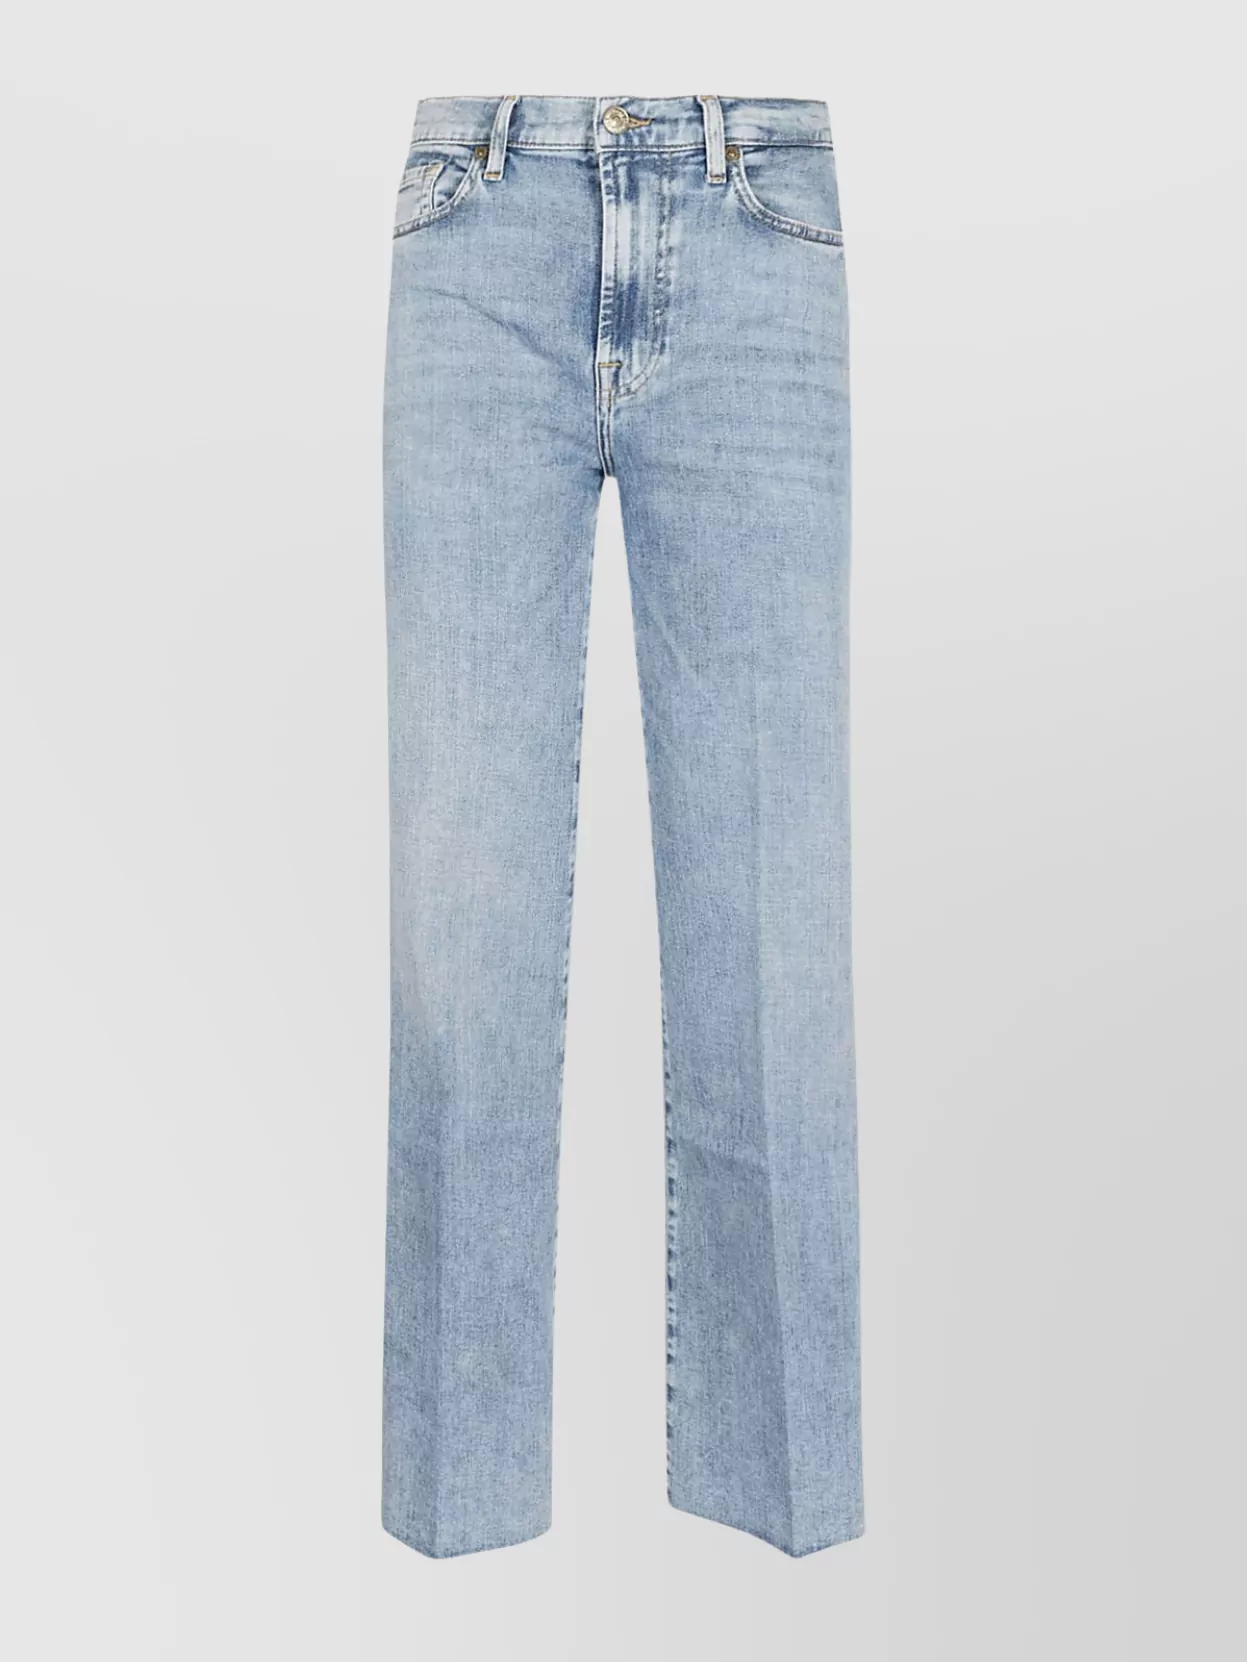 Shop 7 For All Mankind Tailored Denim Trousers Stitching Contrast